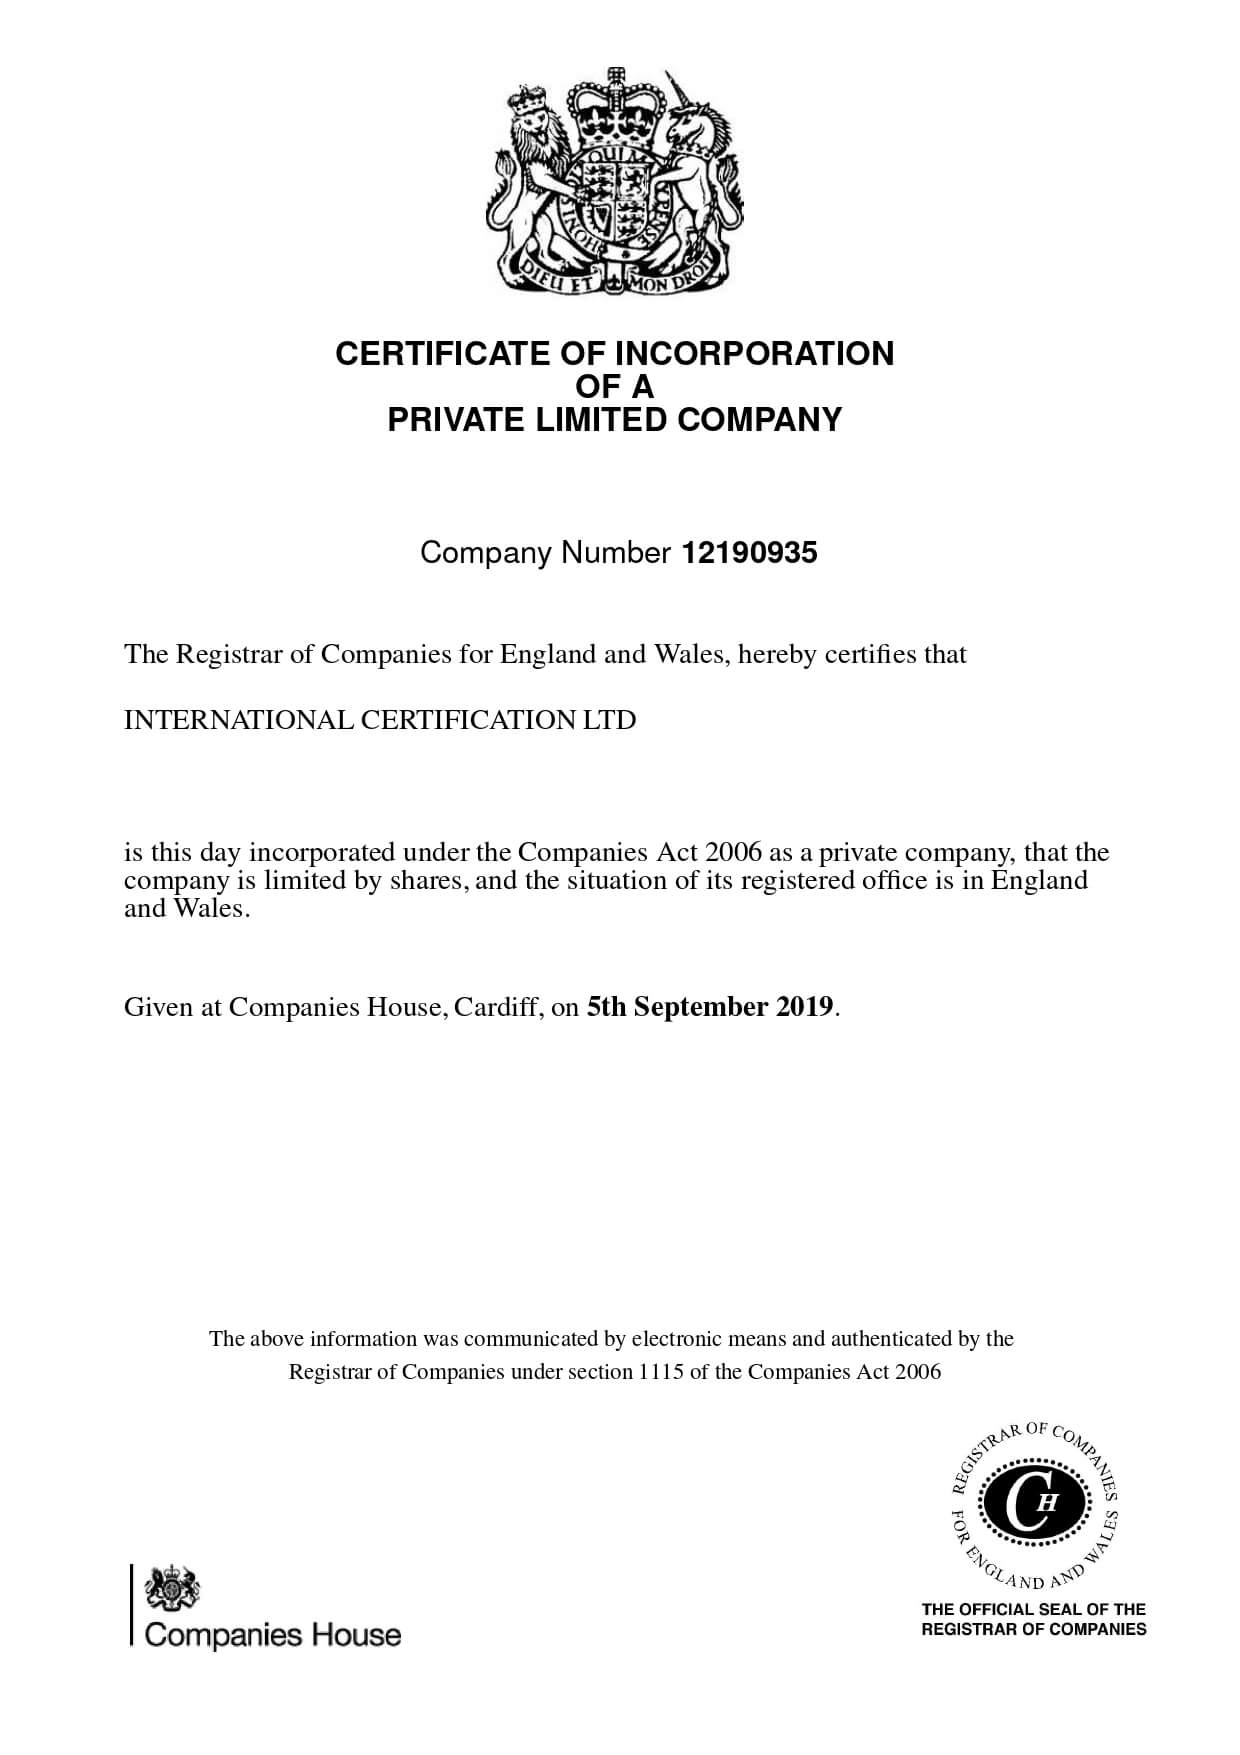 TEFL / TESOL Certification Online Courses Within Share Certificate Template Companies House